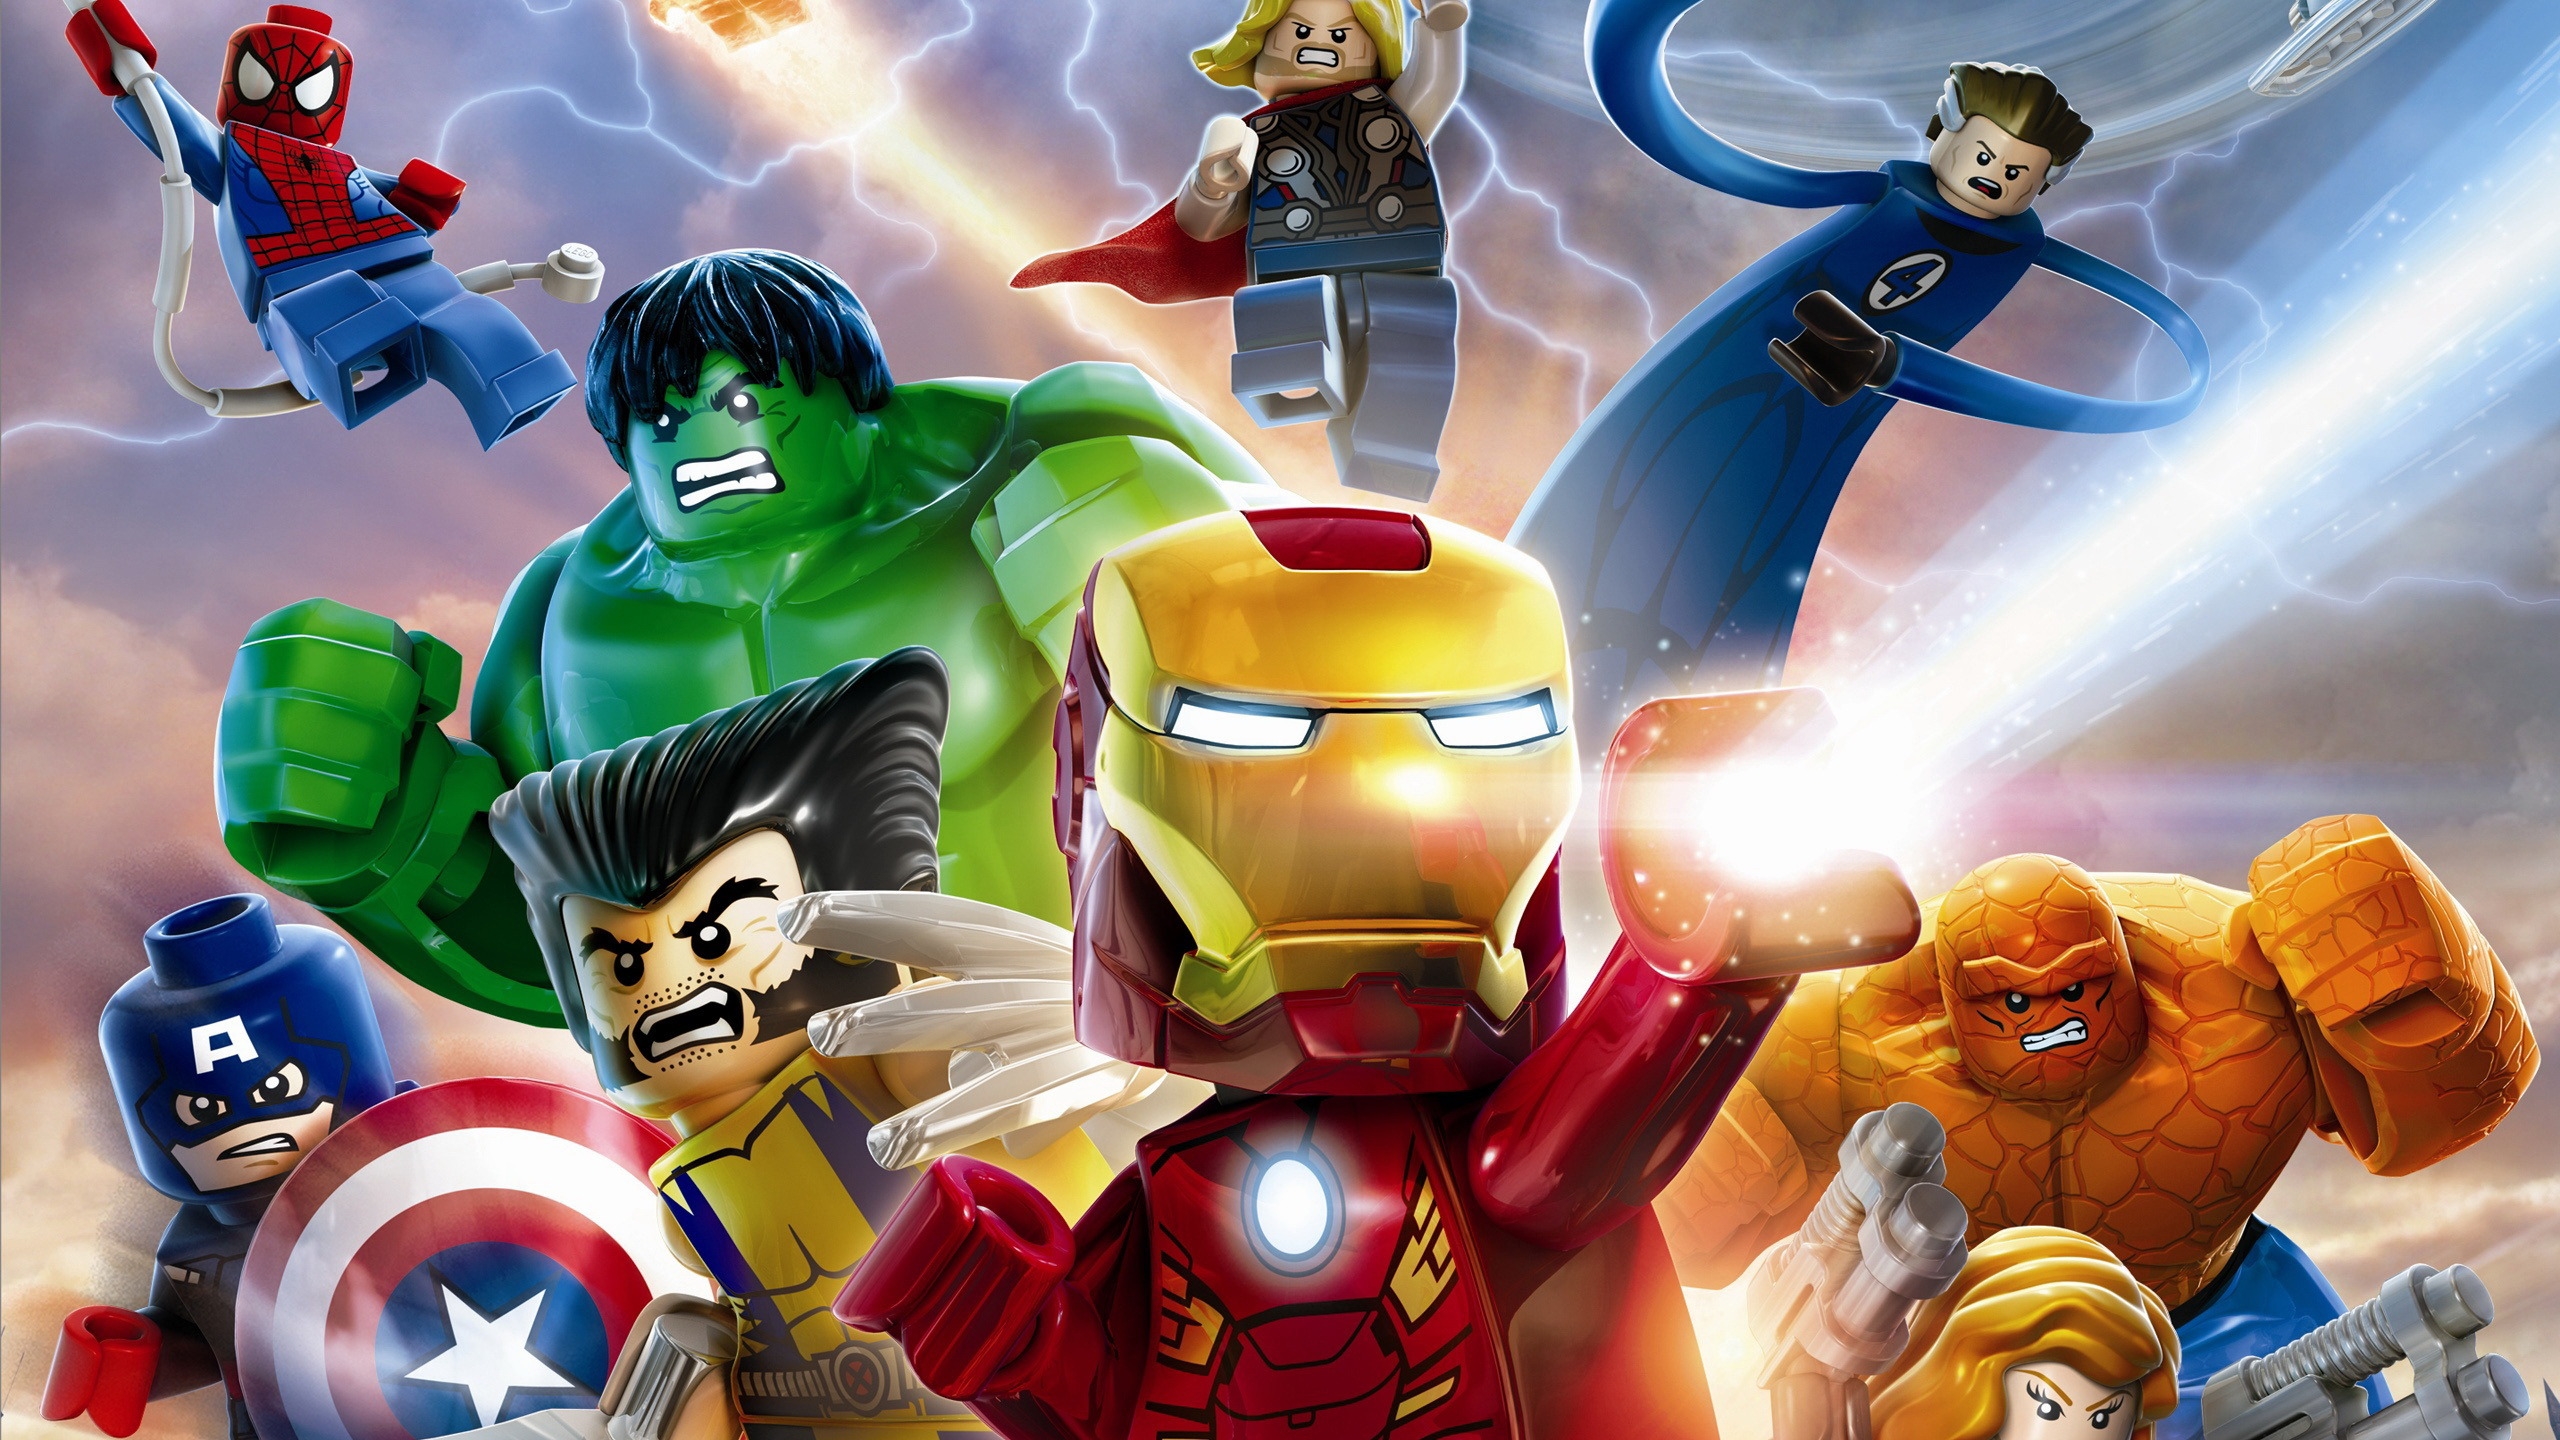 Marvel Super Heroes by Lego for 2560x1440 HDTV resolution